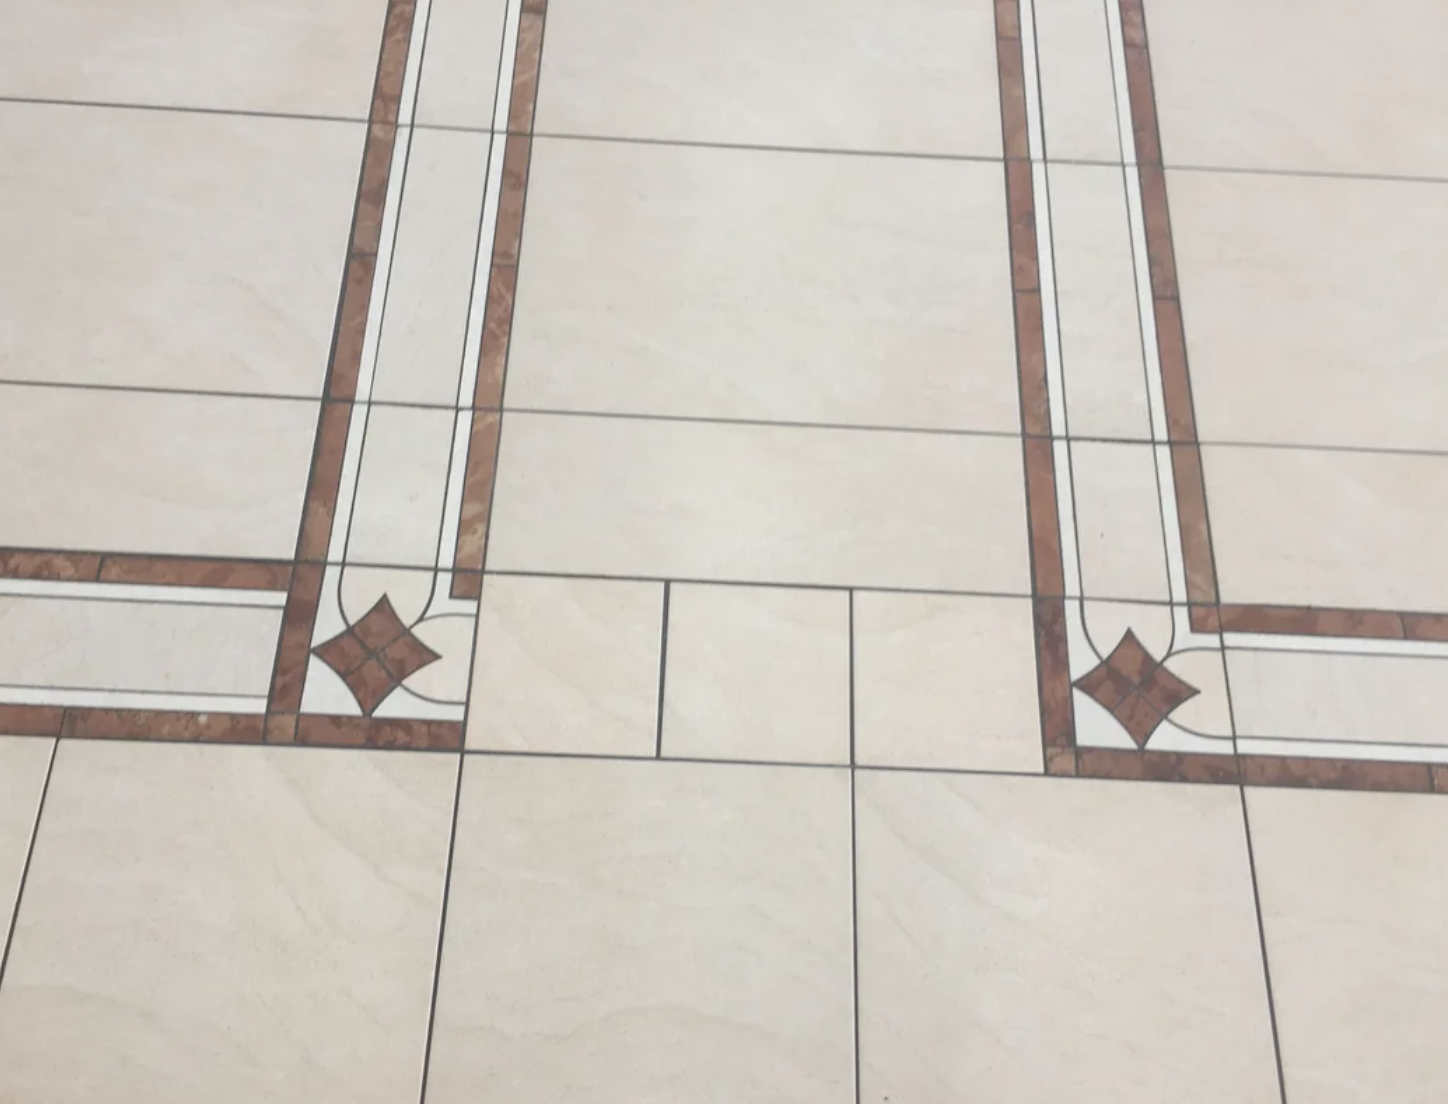 Tiled floor with geometric patterns and decorative borders